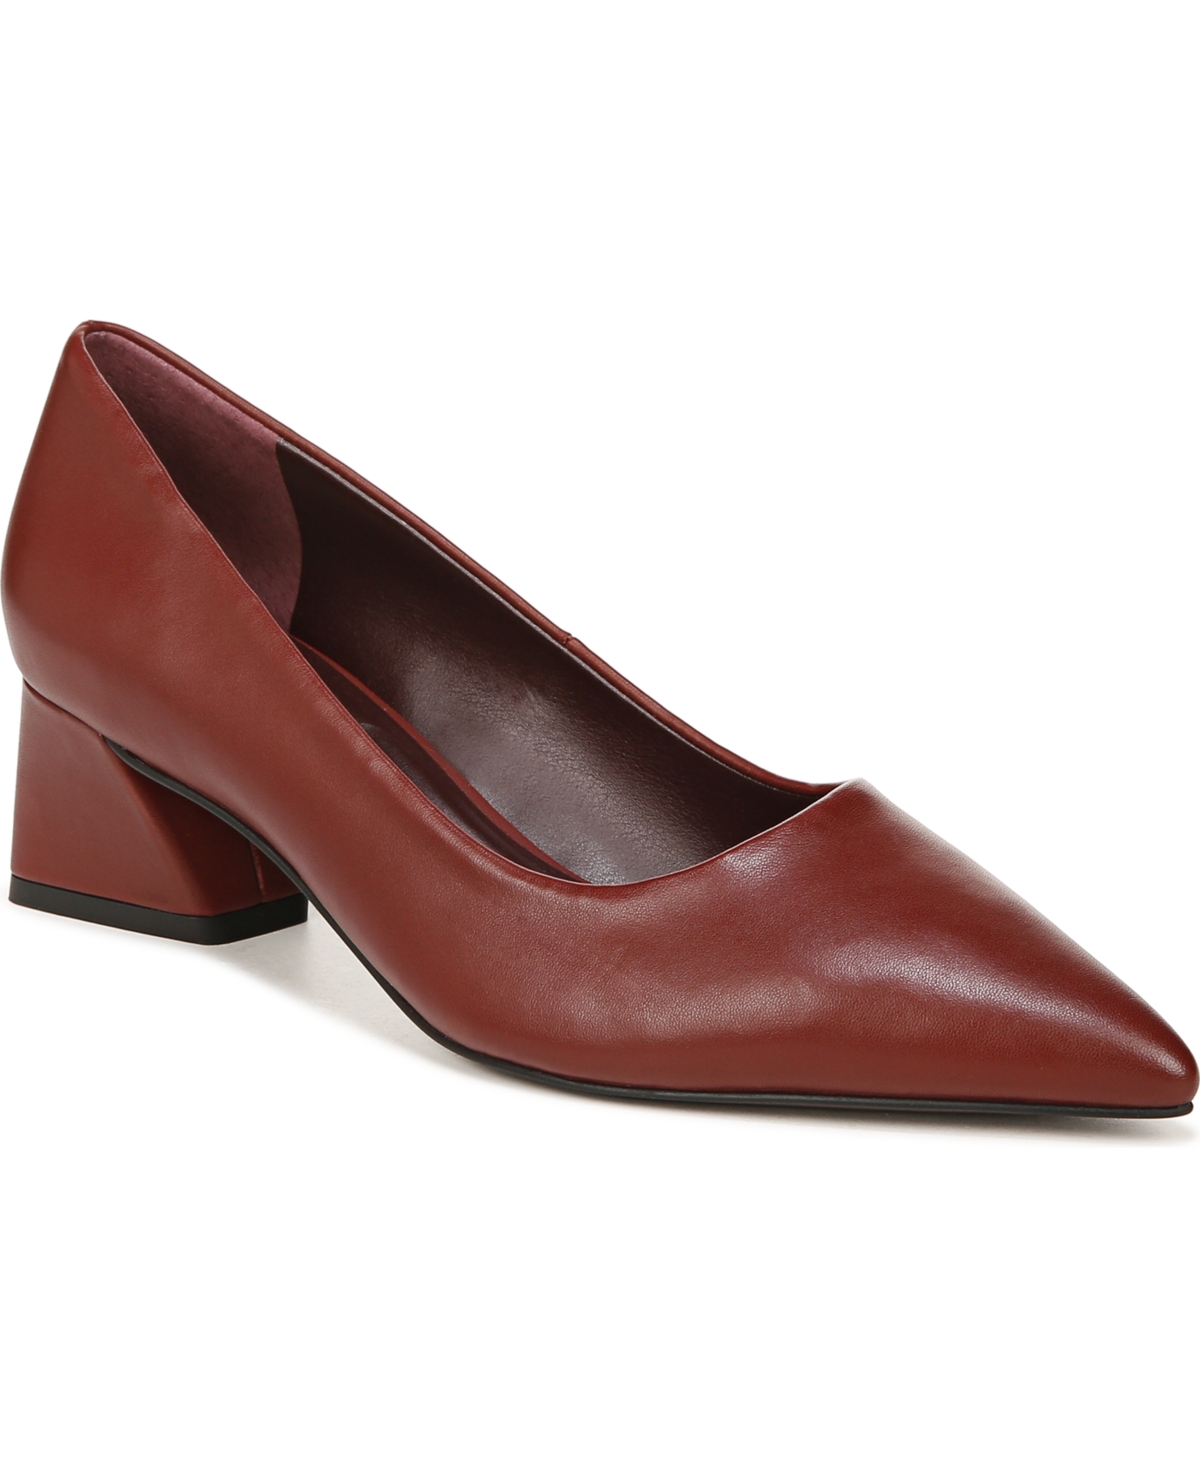 Racer-Pump Pointed Toe Block Heel Pumps - Claret Red Leather